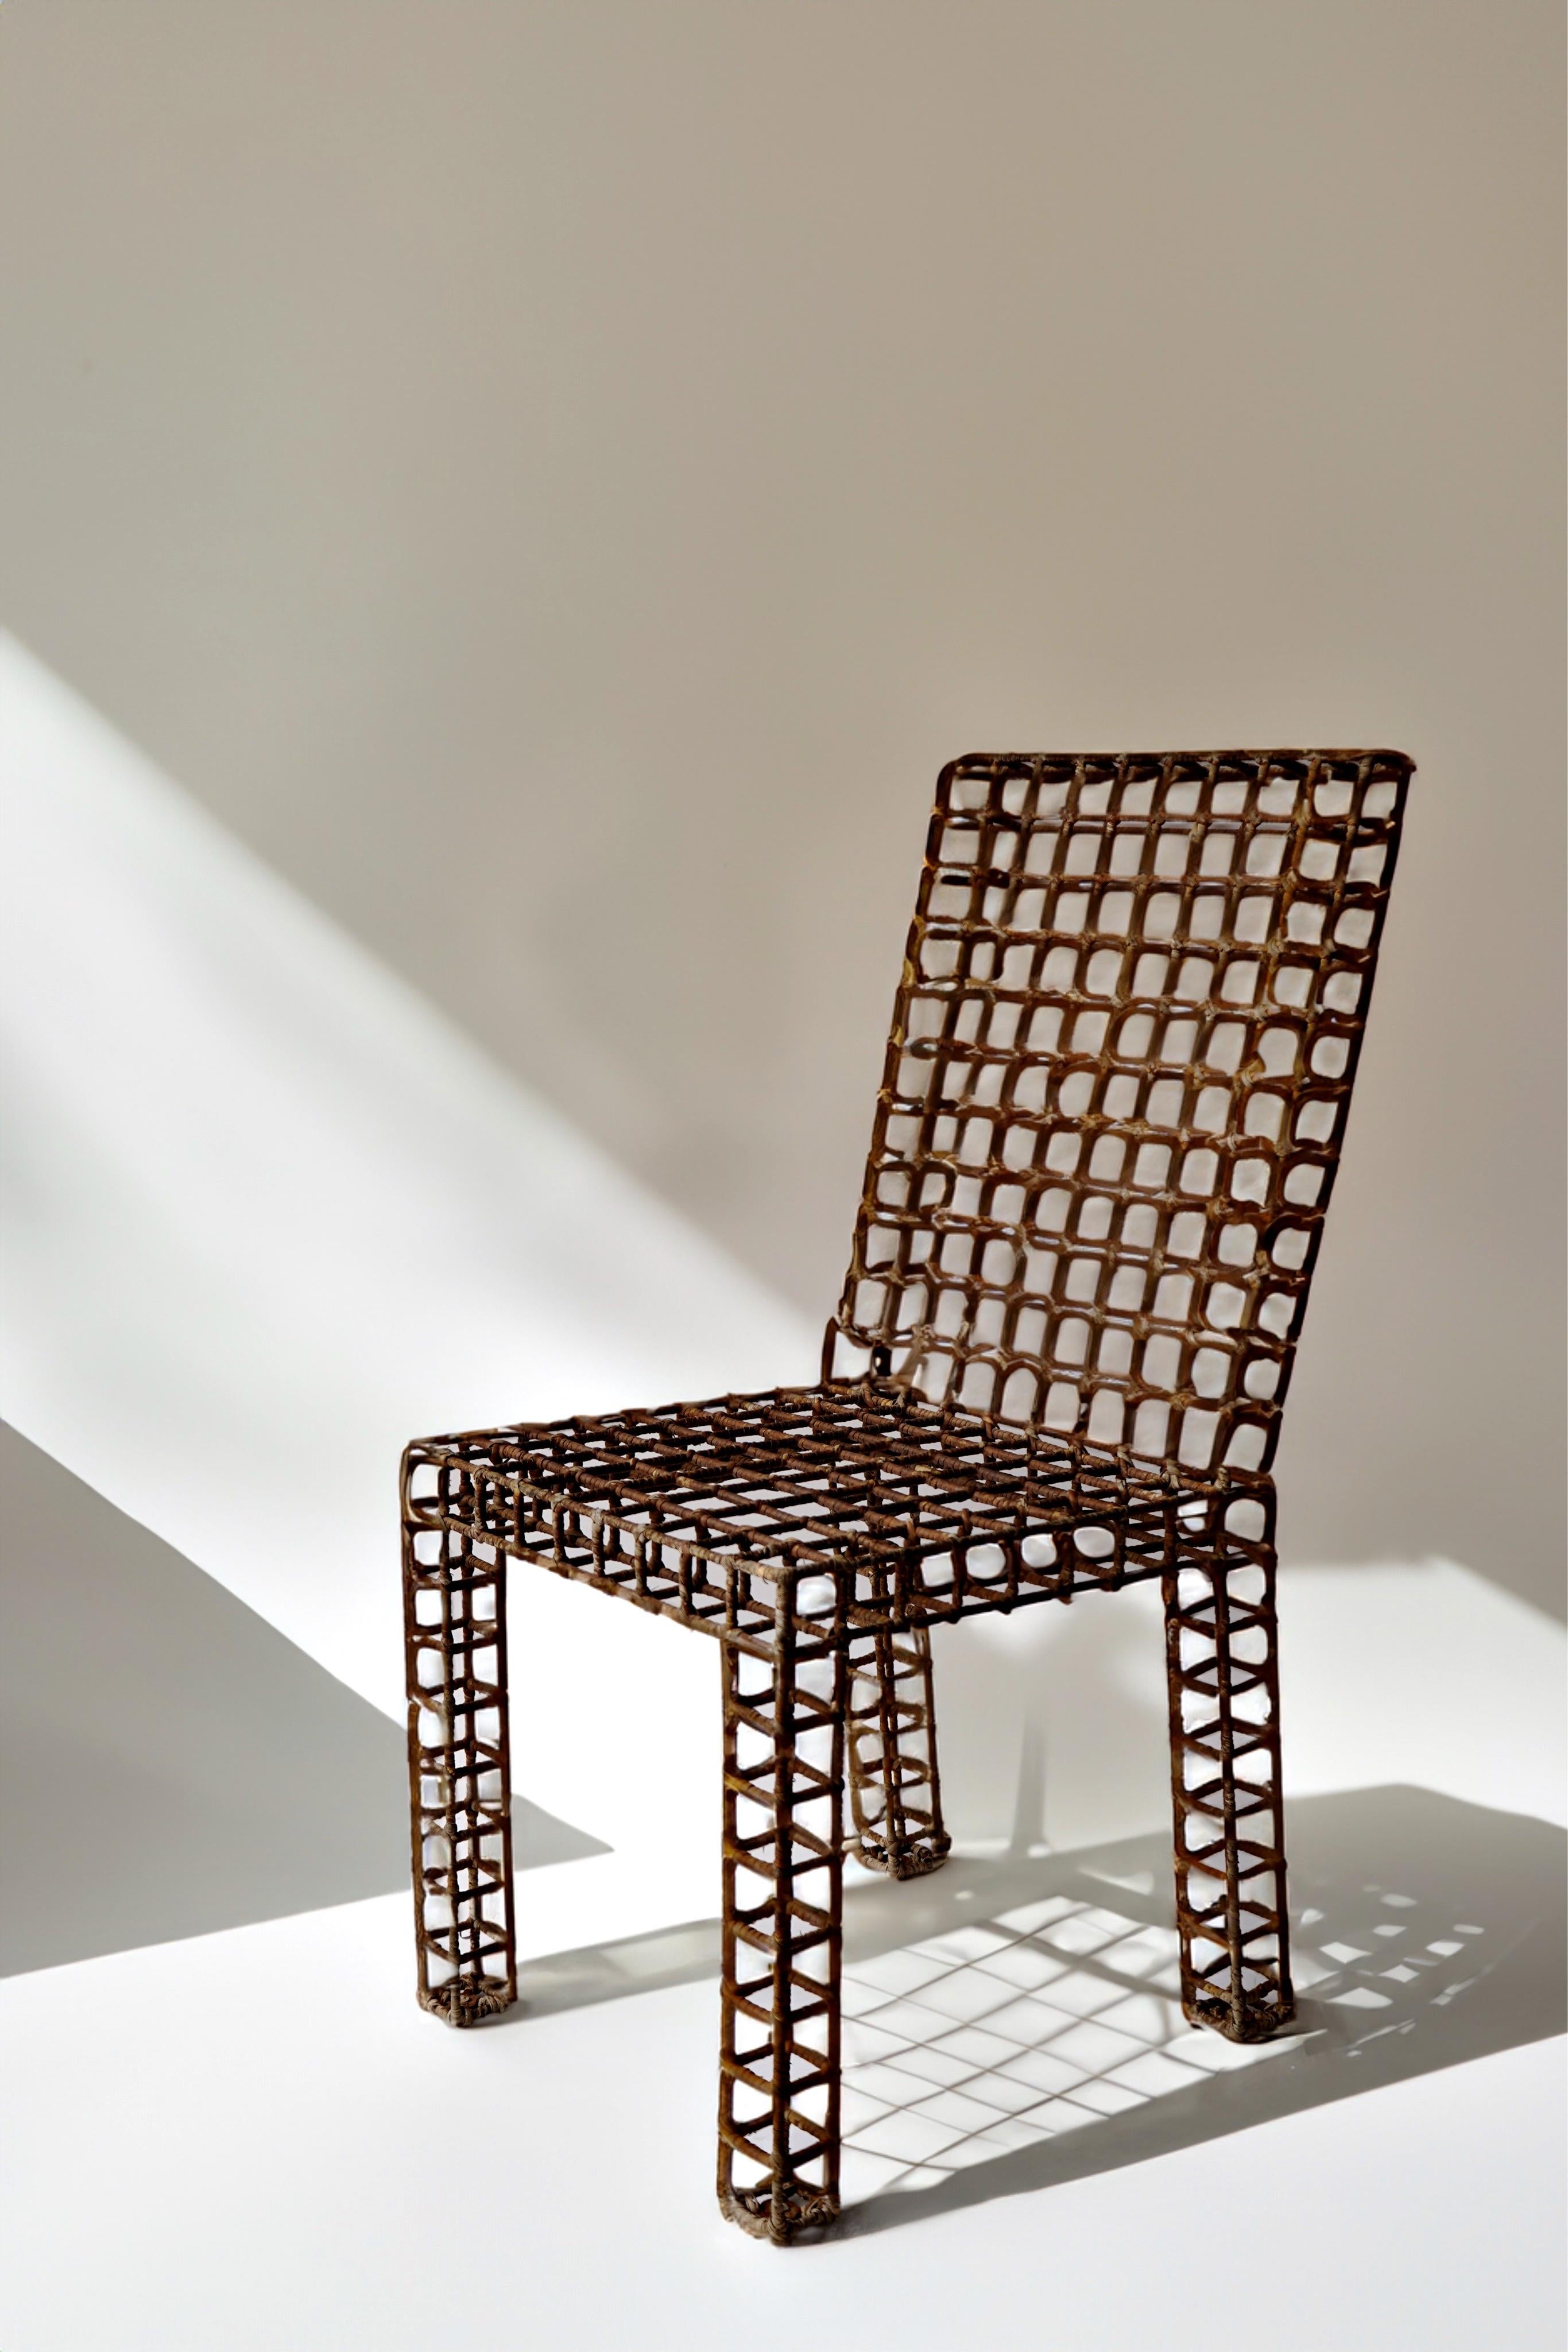 Equal parts sculpture and chair, the gridded visual creates a beautiful fluidity while the rattan-wrapped metal adds depth and tranquility to the design. 6 available.